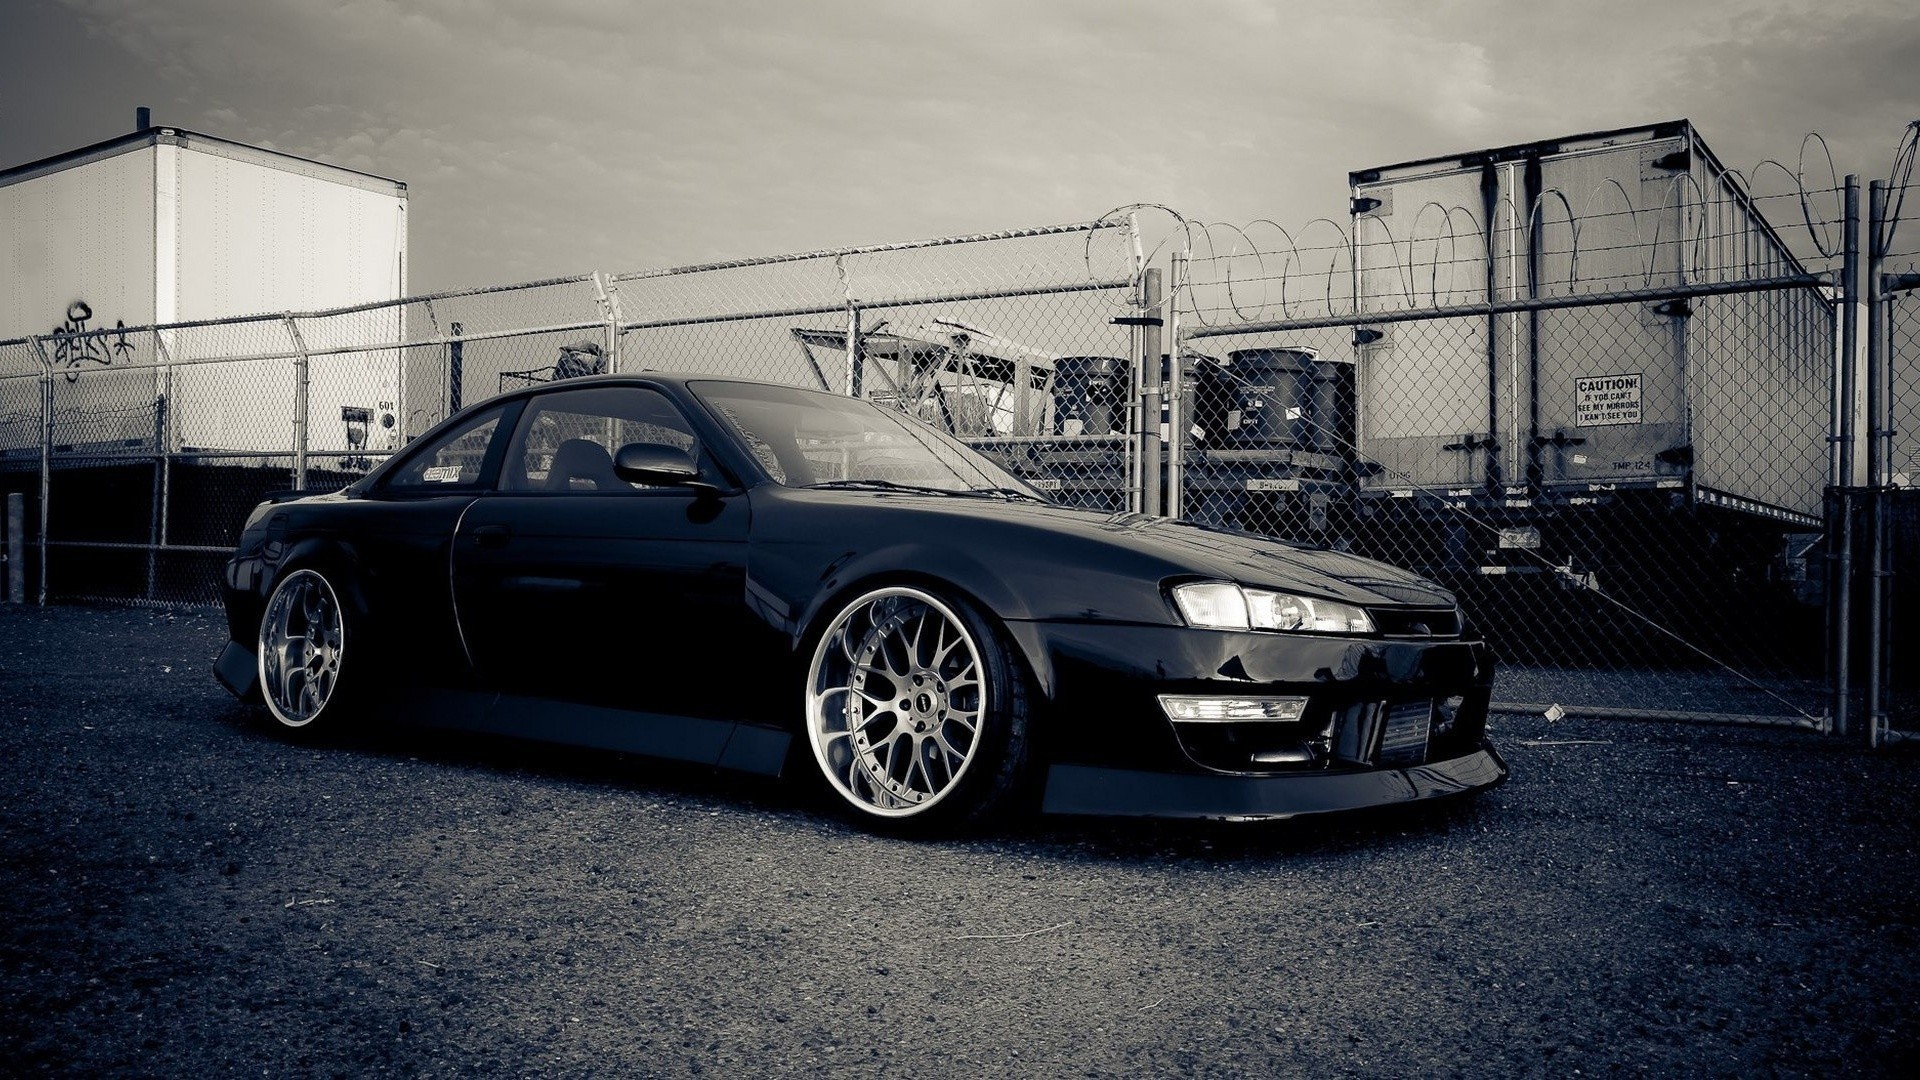 General 1920x1080 Nissan Silvia S14 Nissan Silvia Nissan Japanese cars frontal view black cars vehicle Straight-four engine